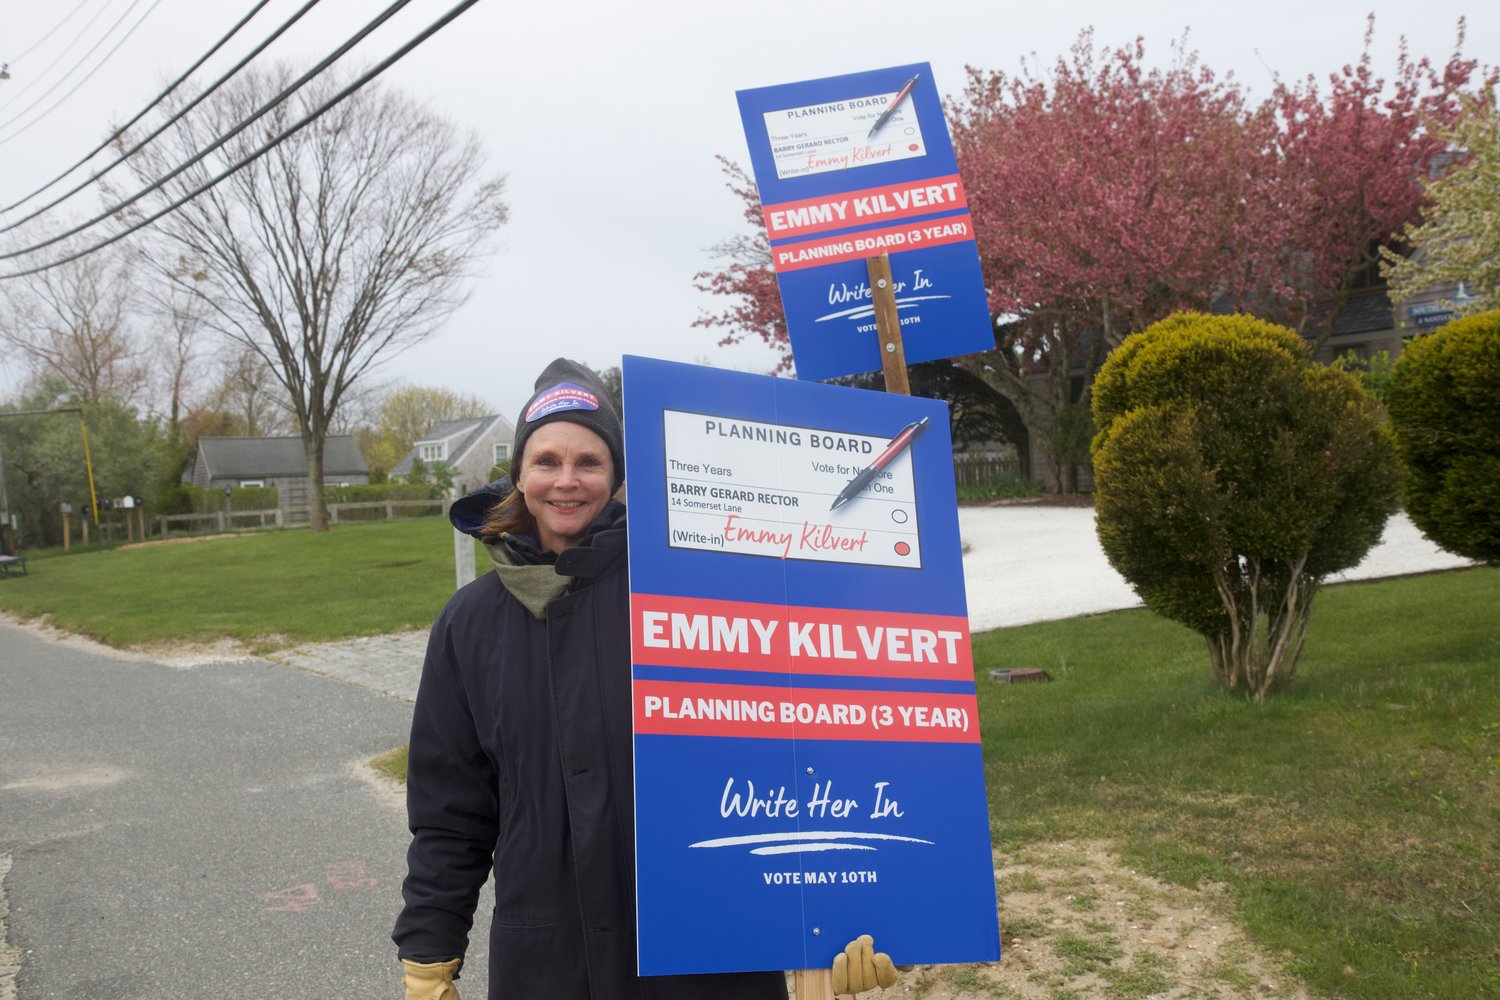 Emmy Kilvert narrowly lost a write-in campaign for Planning Board